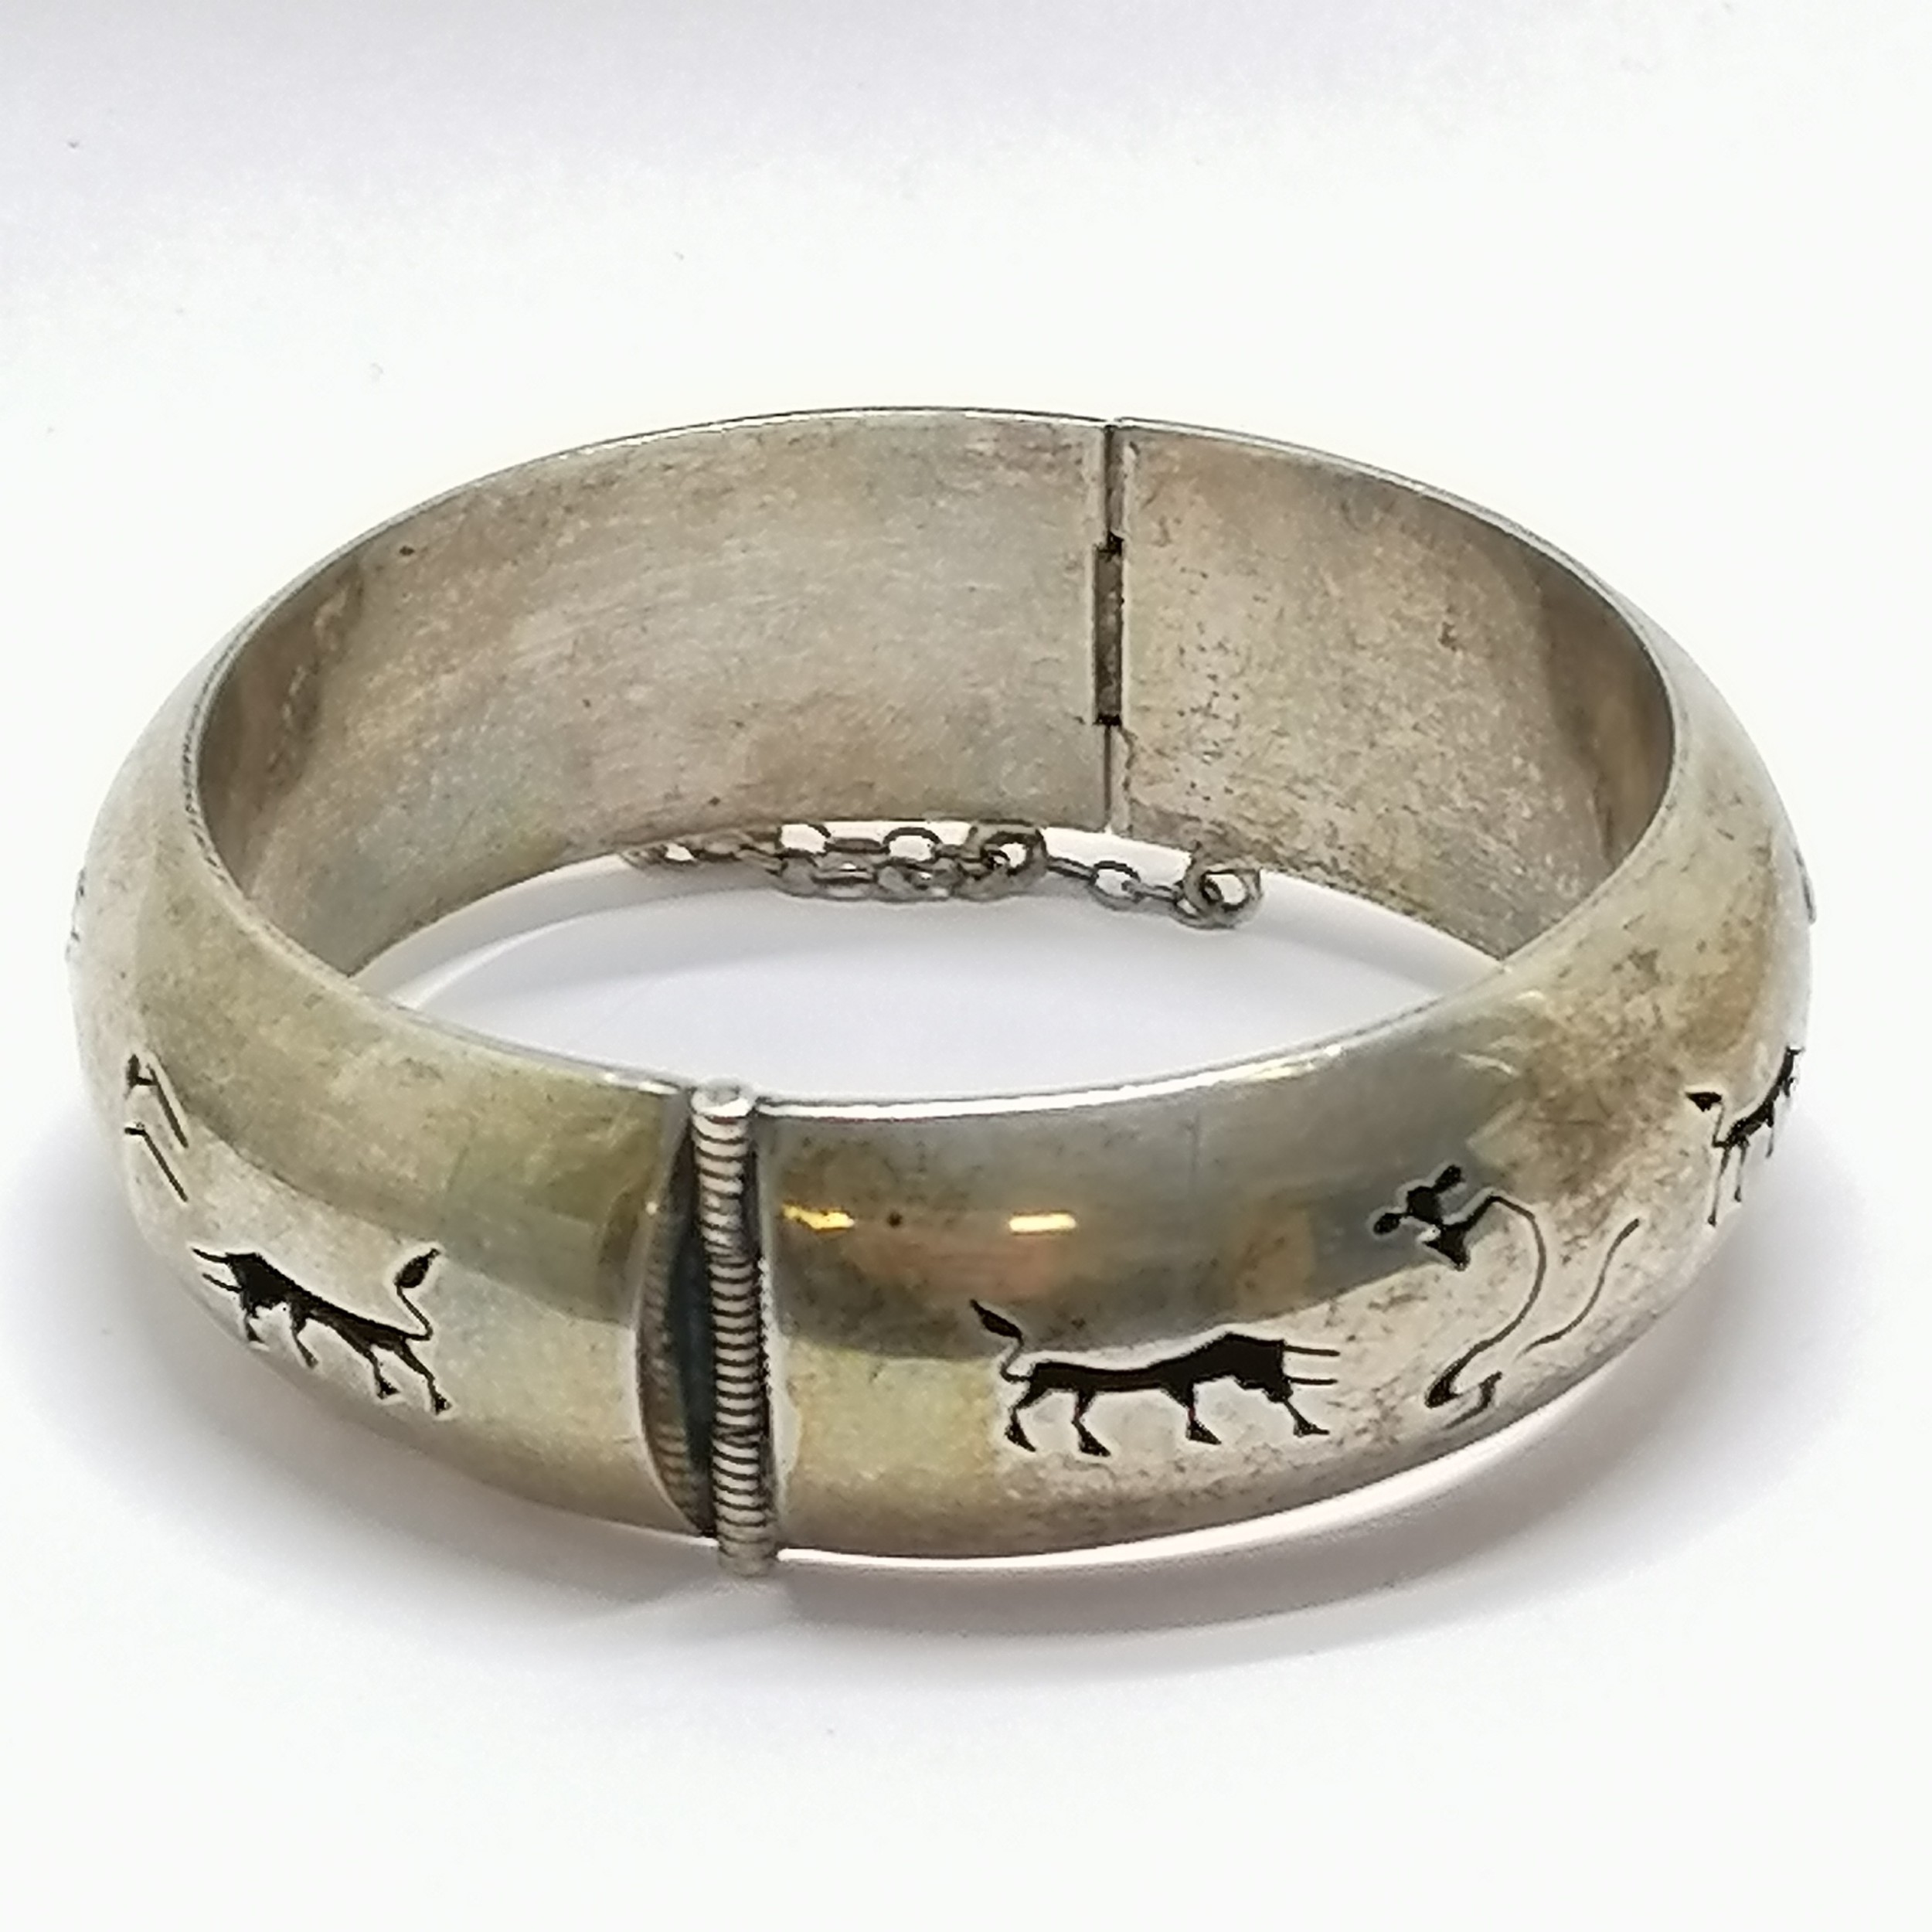 Mexican sterling silver bangle with cut-out bullfighting detail - 5.8cm internal diameter & 44g - Image 2 of 3